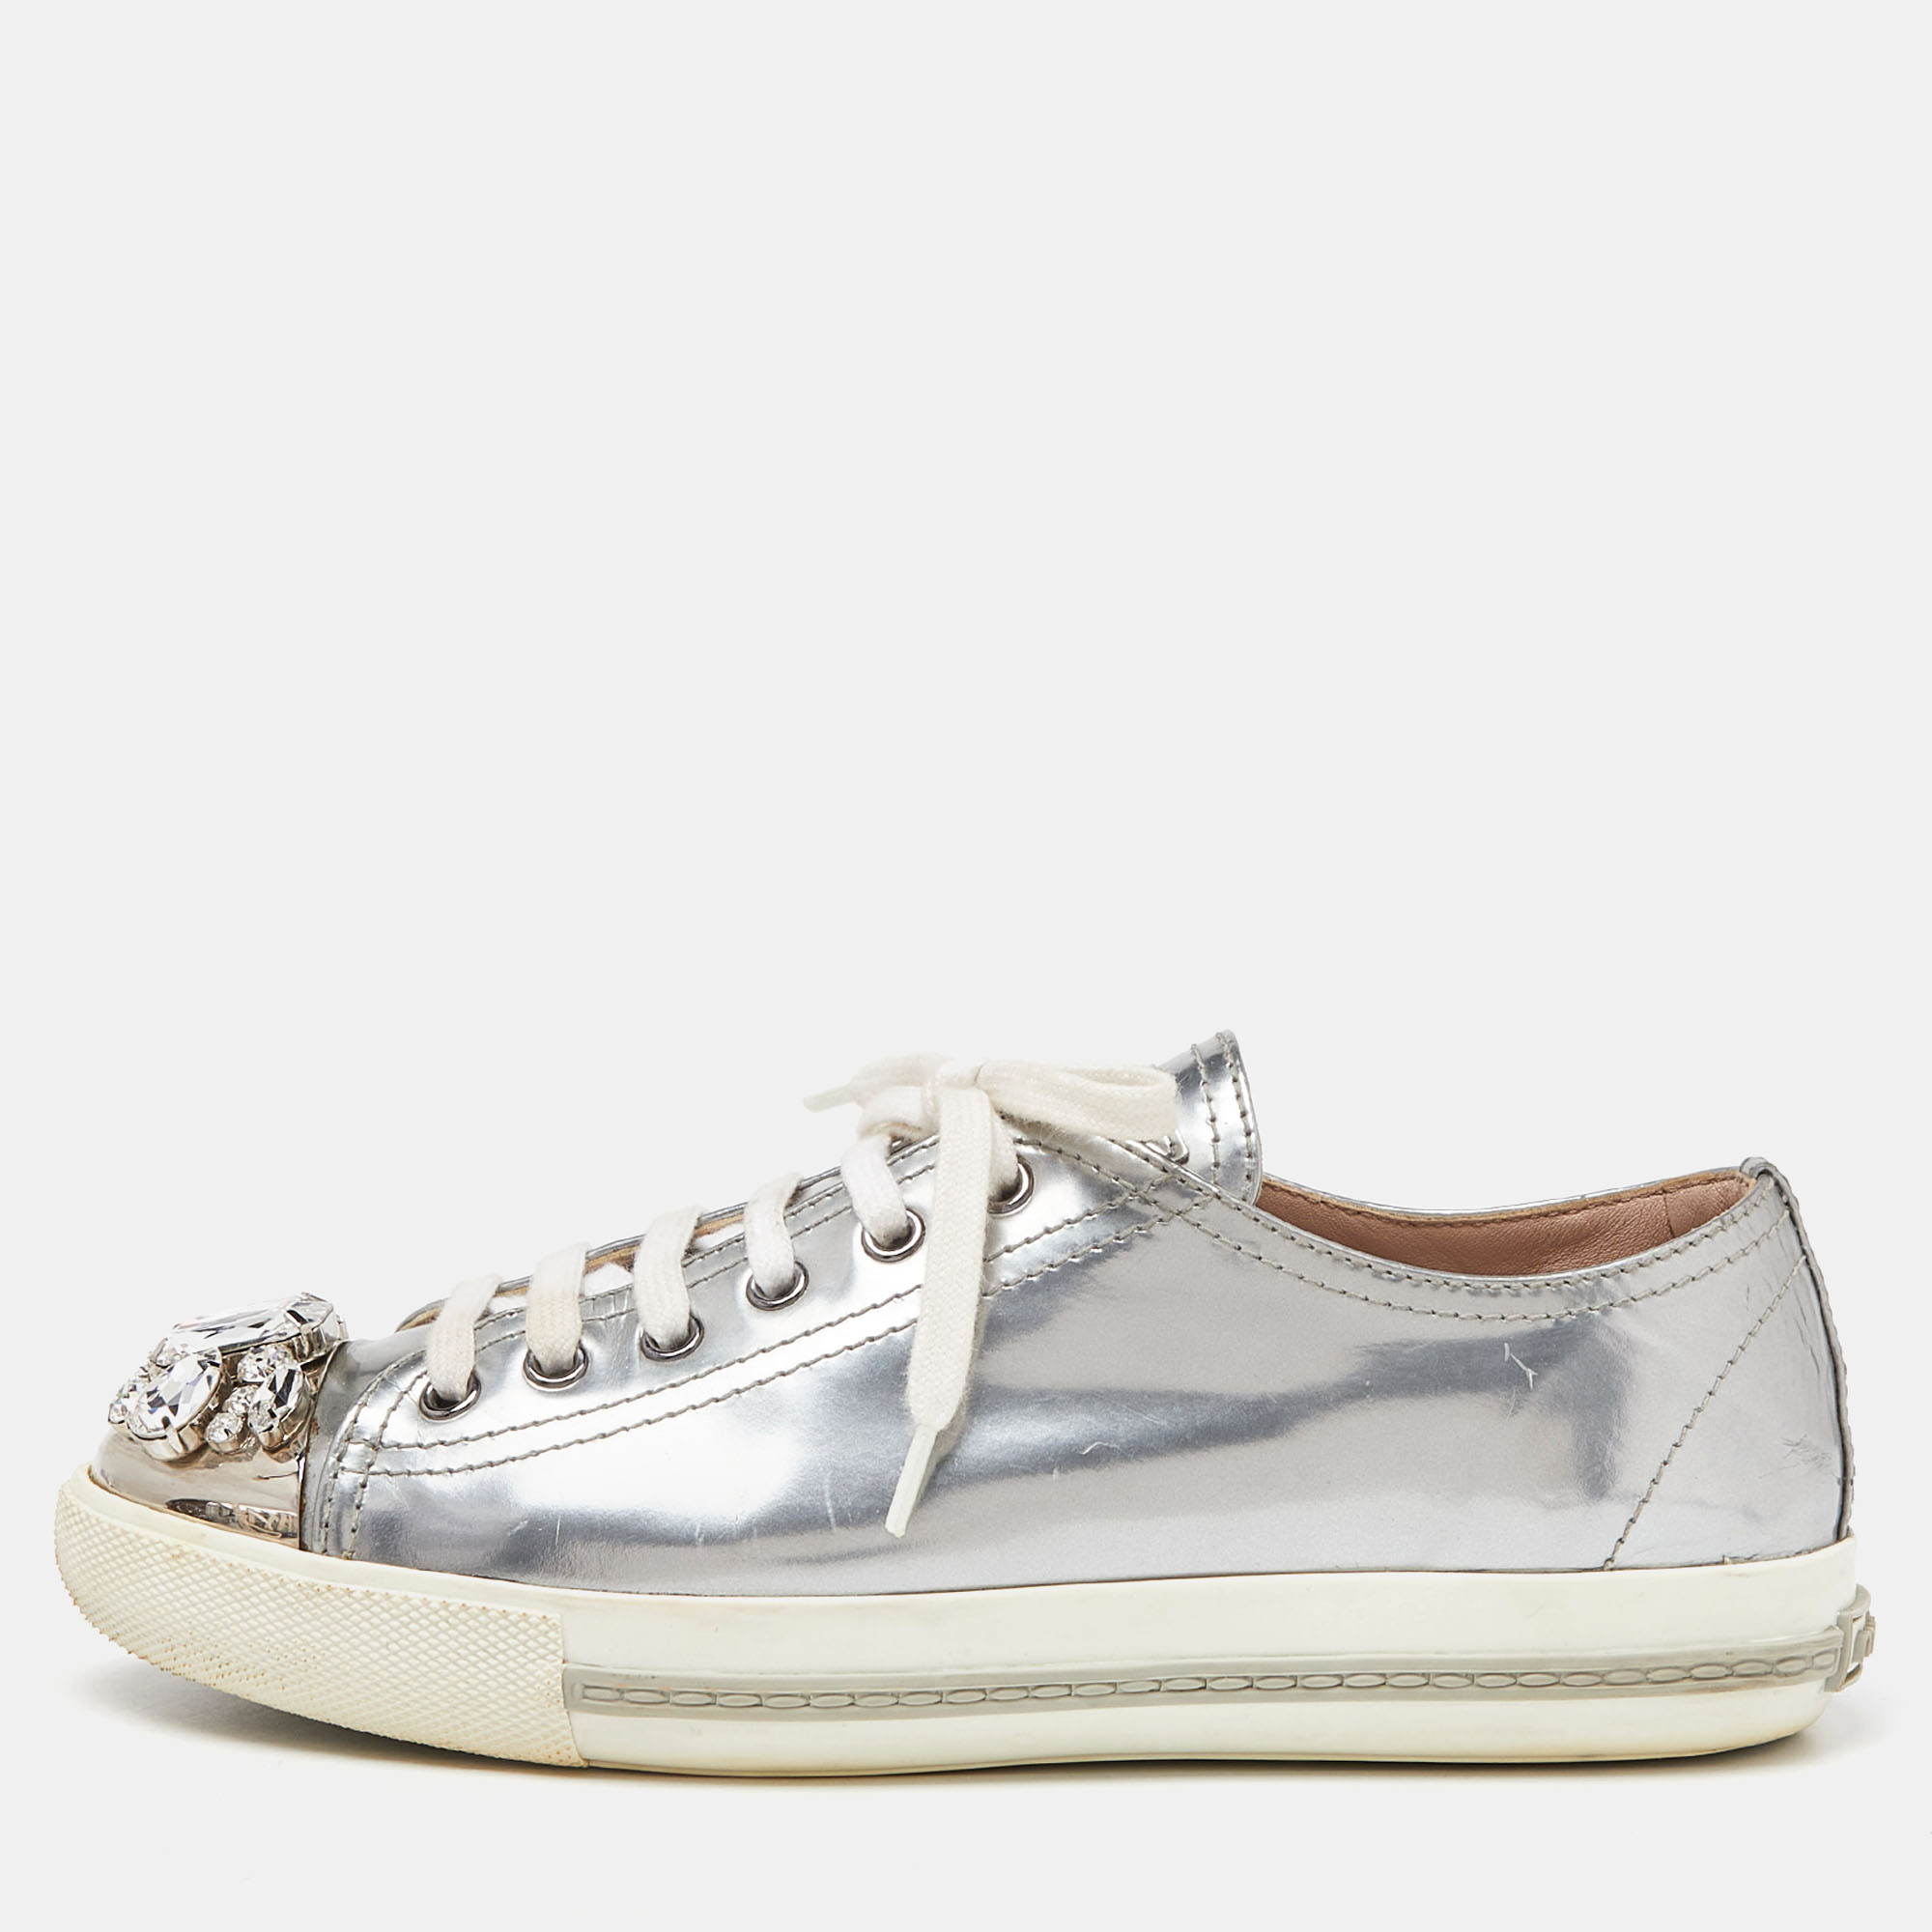 Pre-owned Miu Miu Silver Patent Leather Crystal Embellished Cap-toe Low-top Sneakers Size 38.5